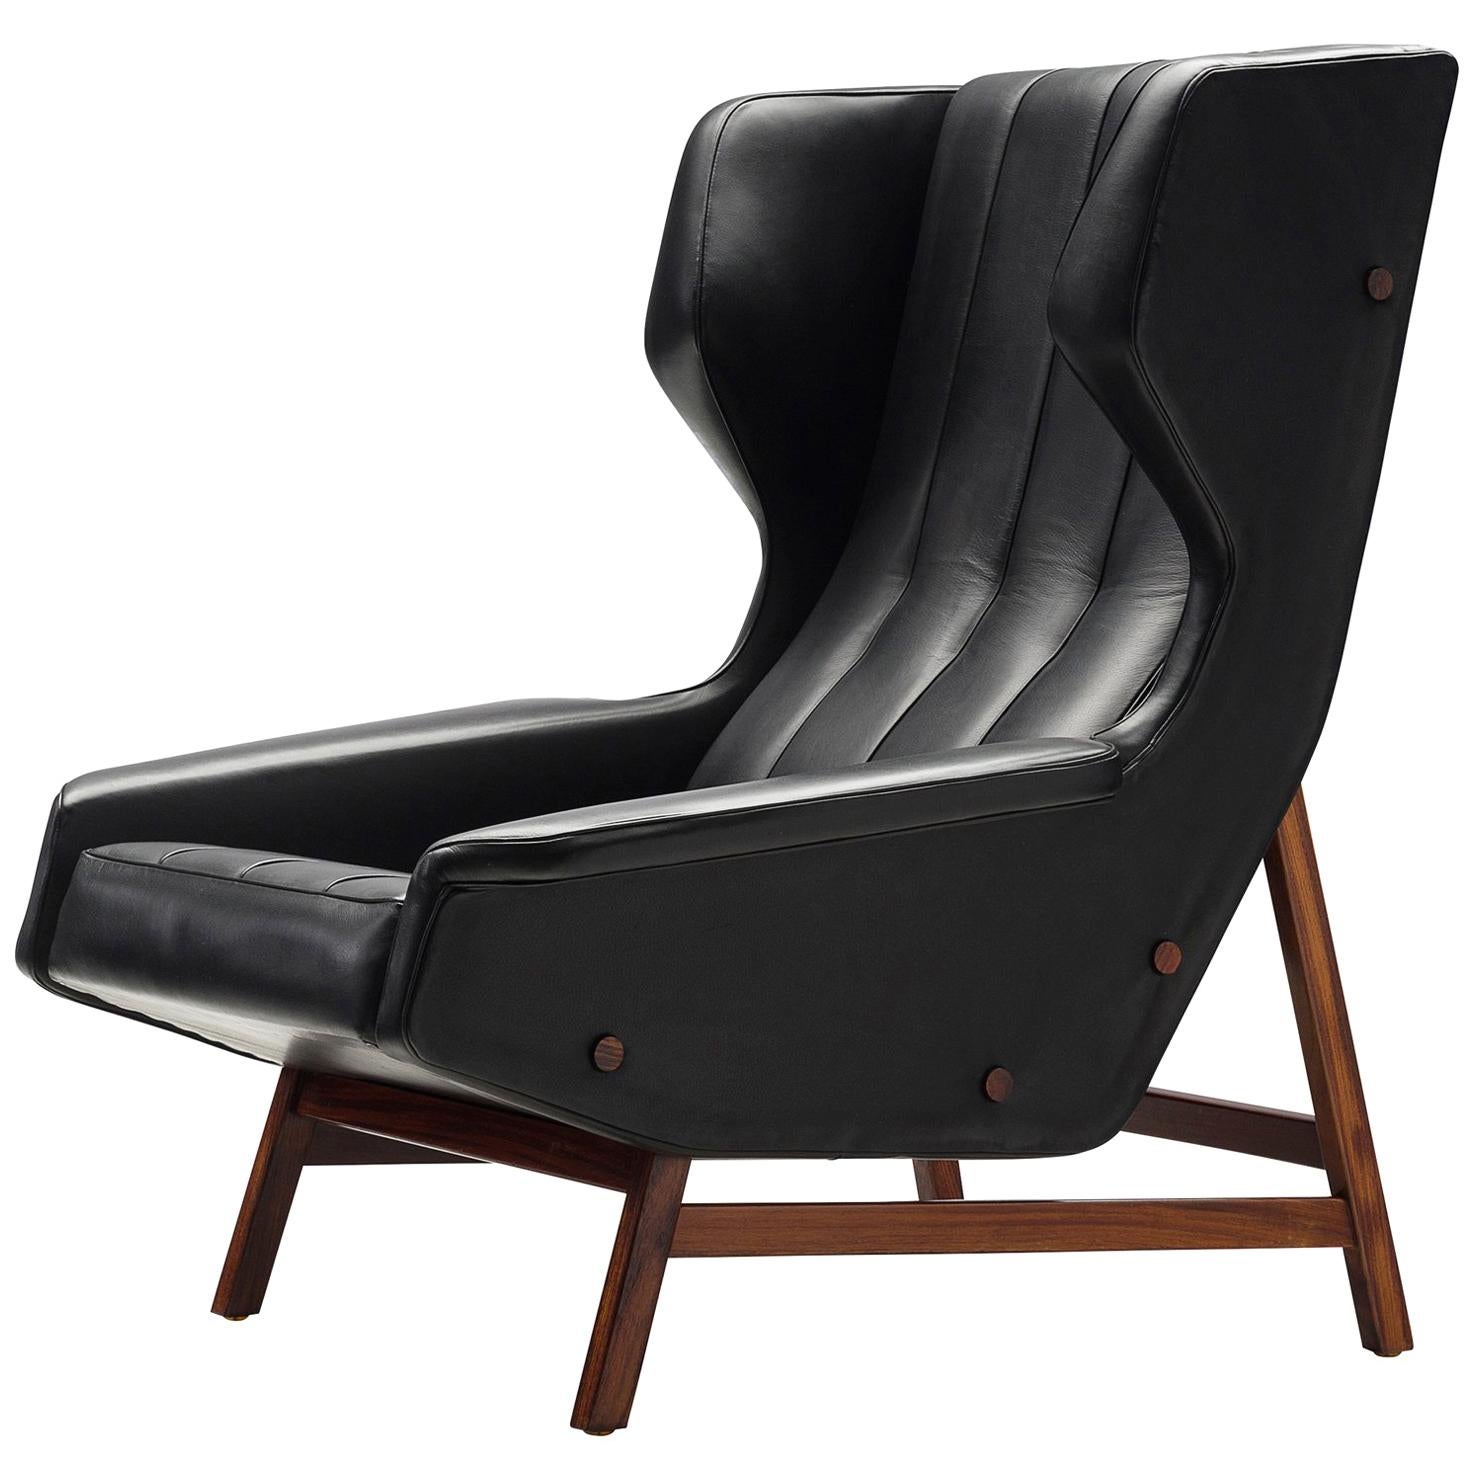 Gianfranco Frattini Lounge Chair Reupholstered with Aniline Leather 